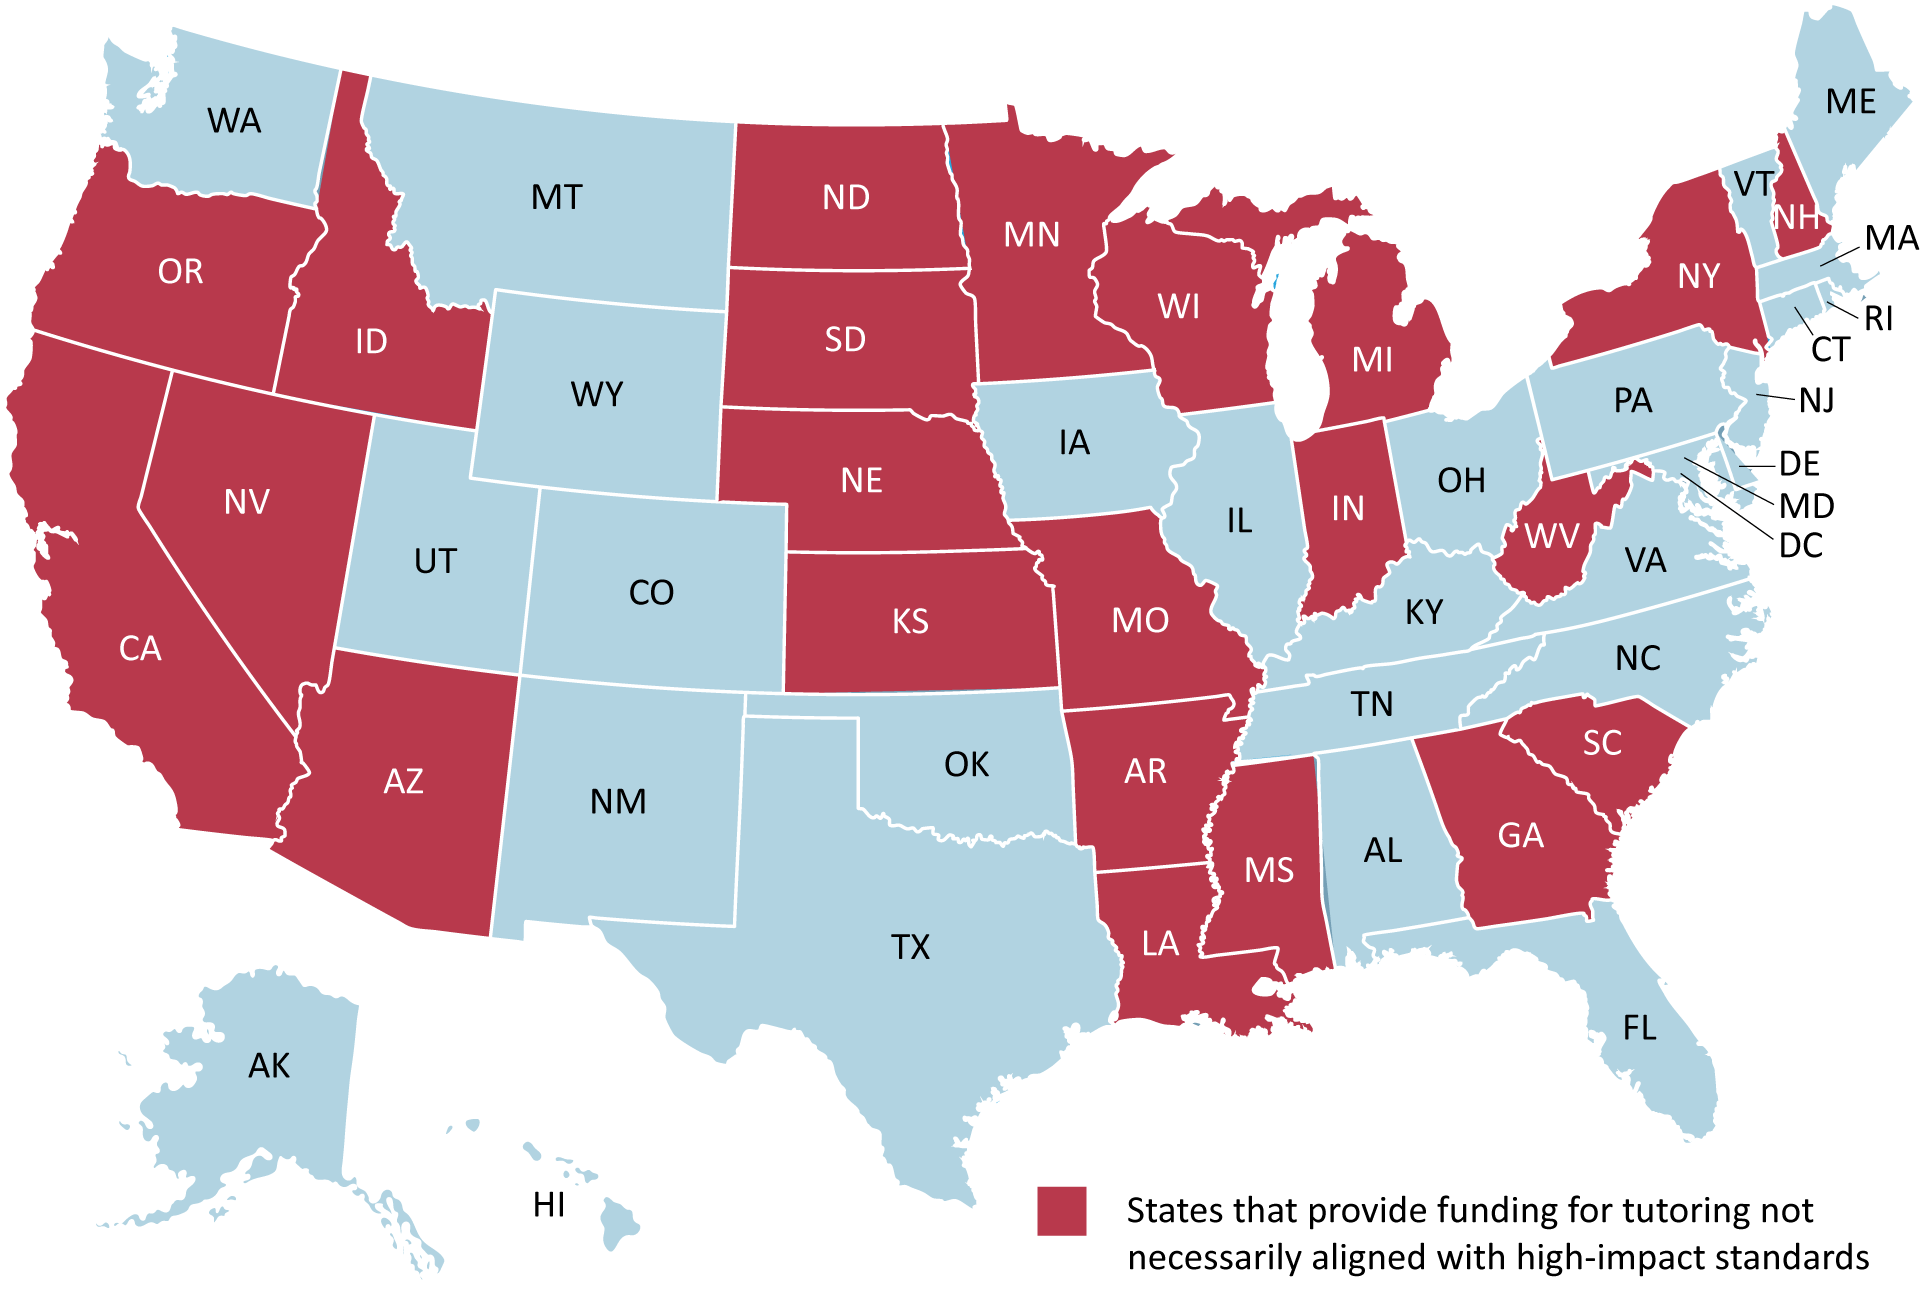 States that provide funding for tutoring not necessarily aligned with high-impact standards